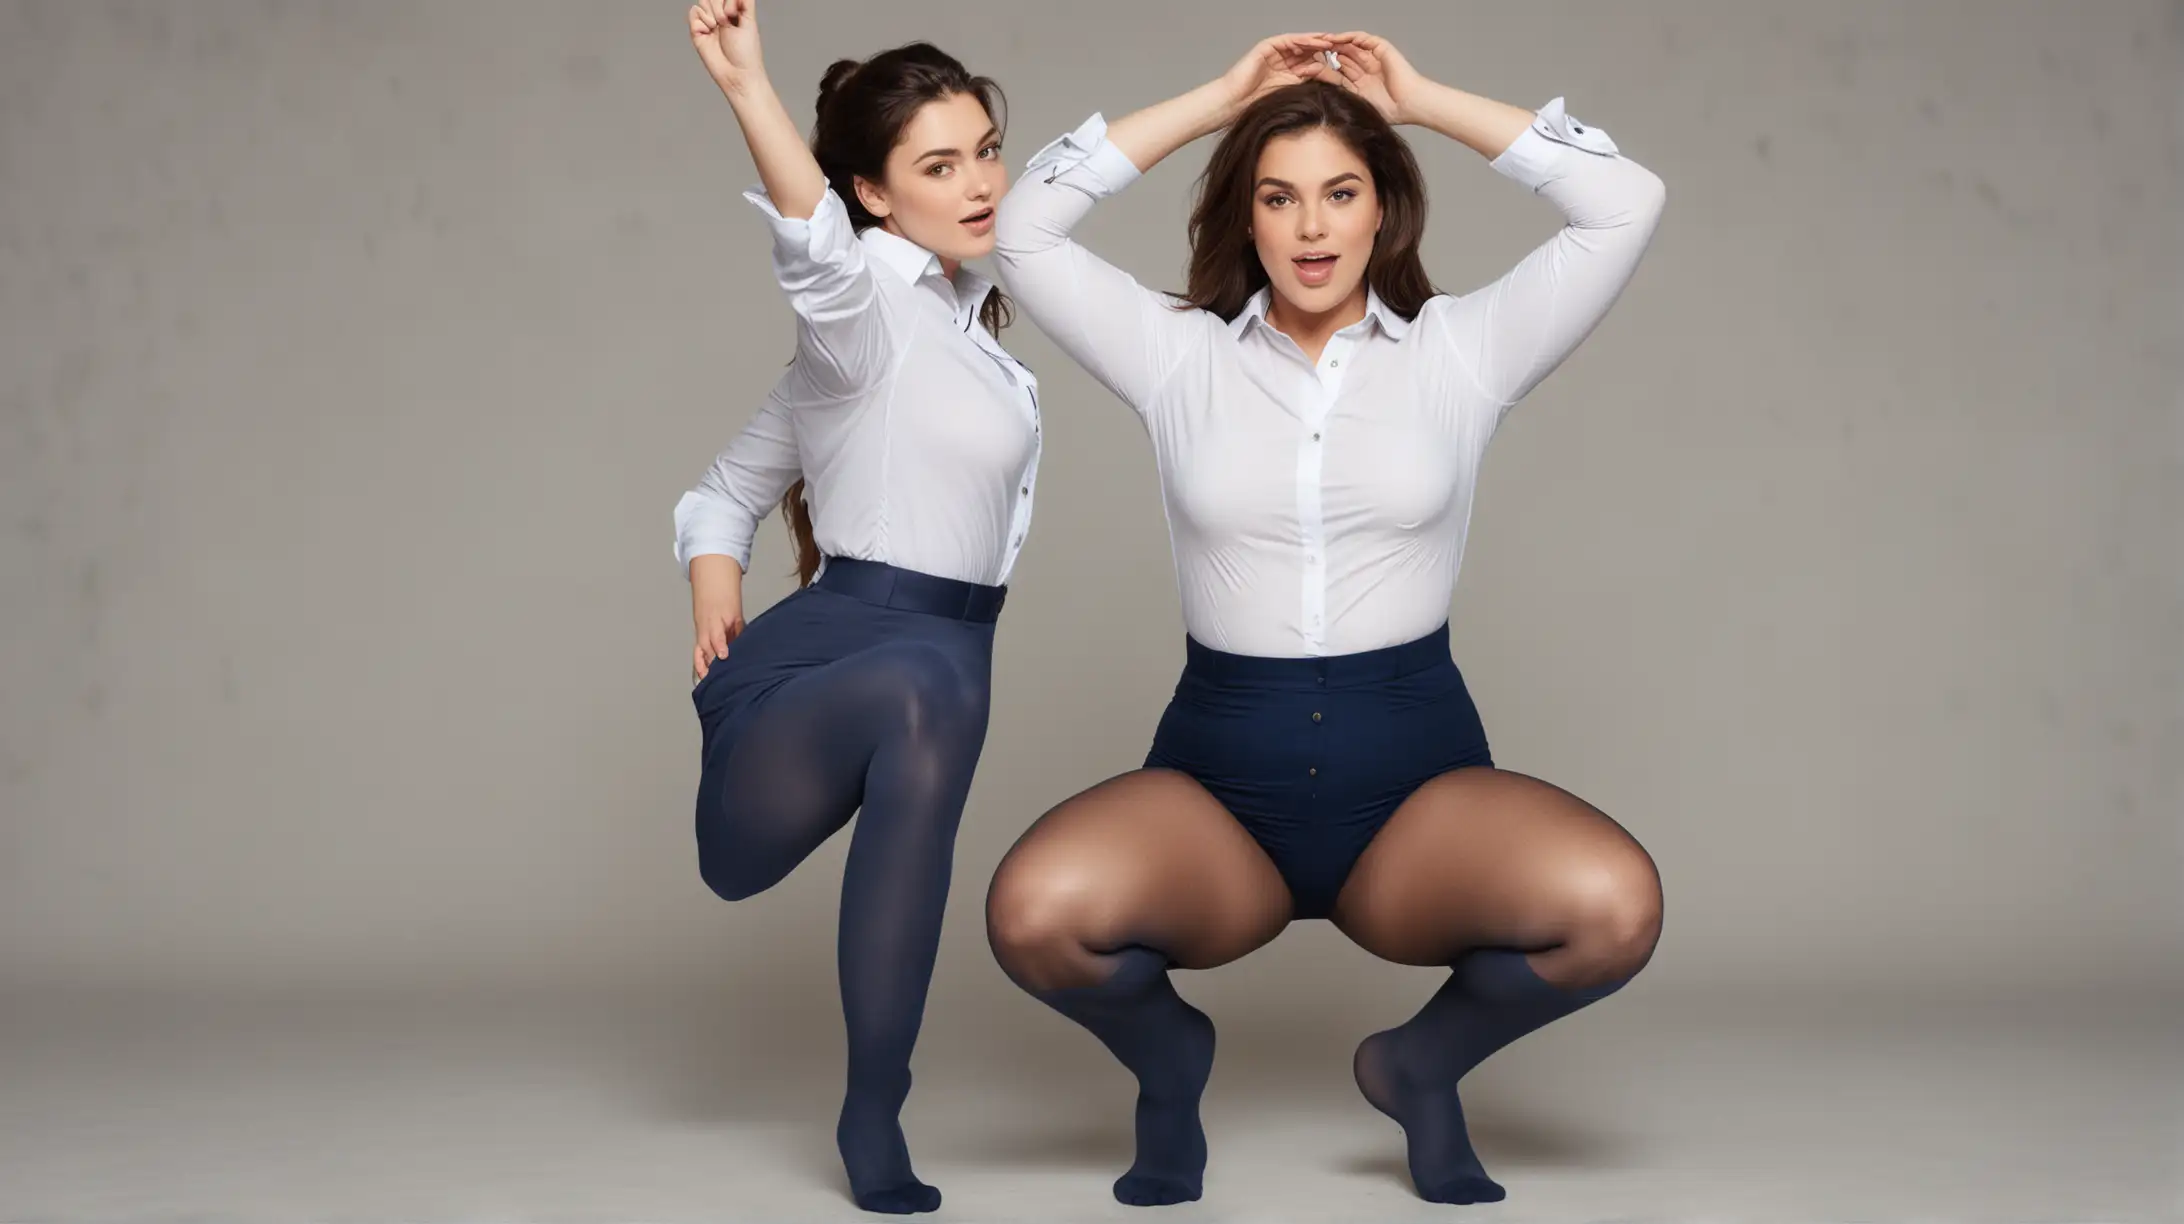 Two Squatting Women in Button Down Shirts and Pantyhose